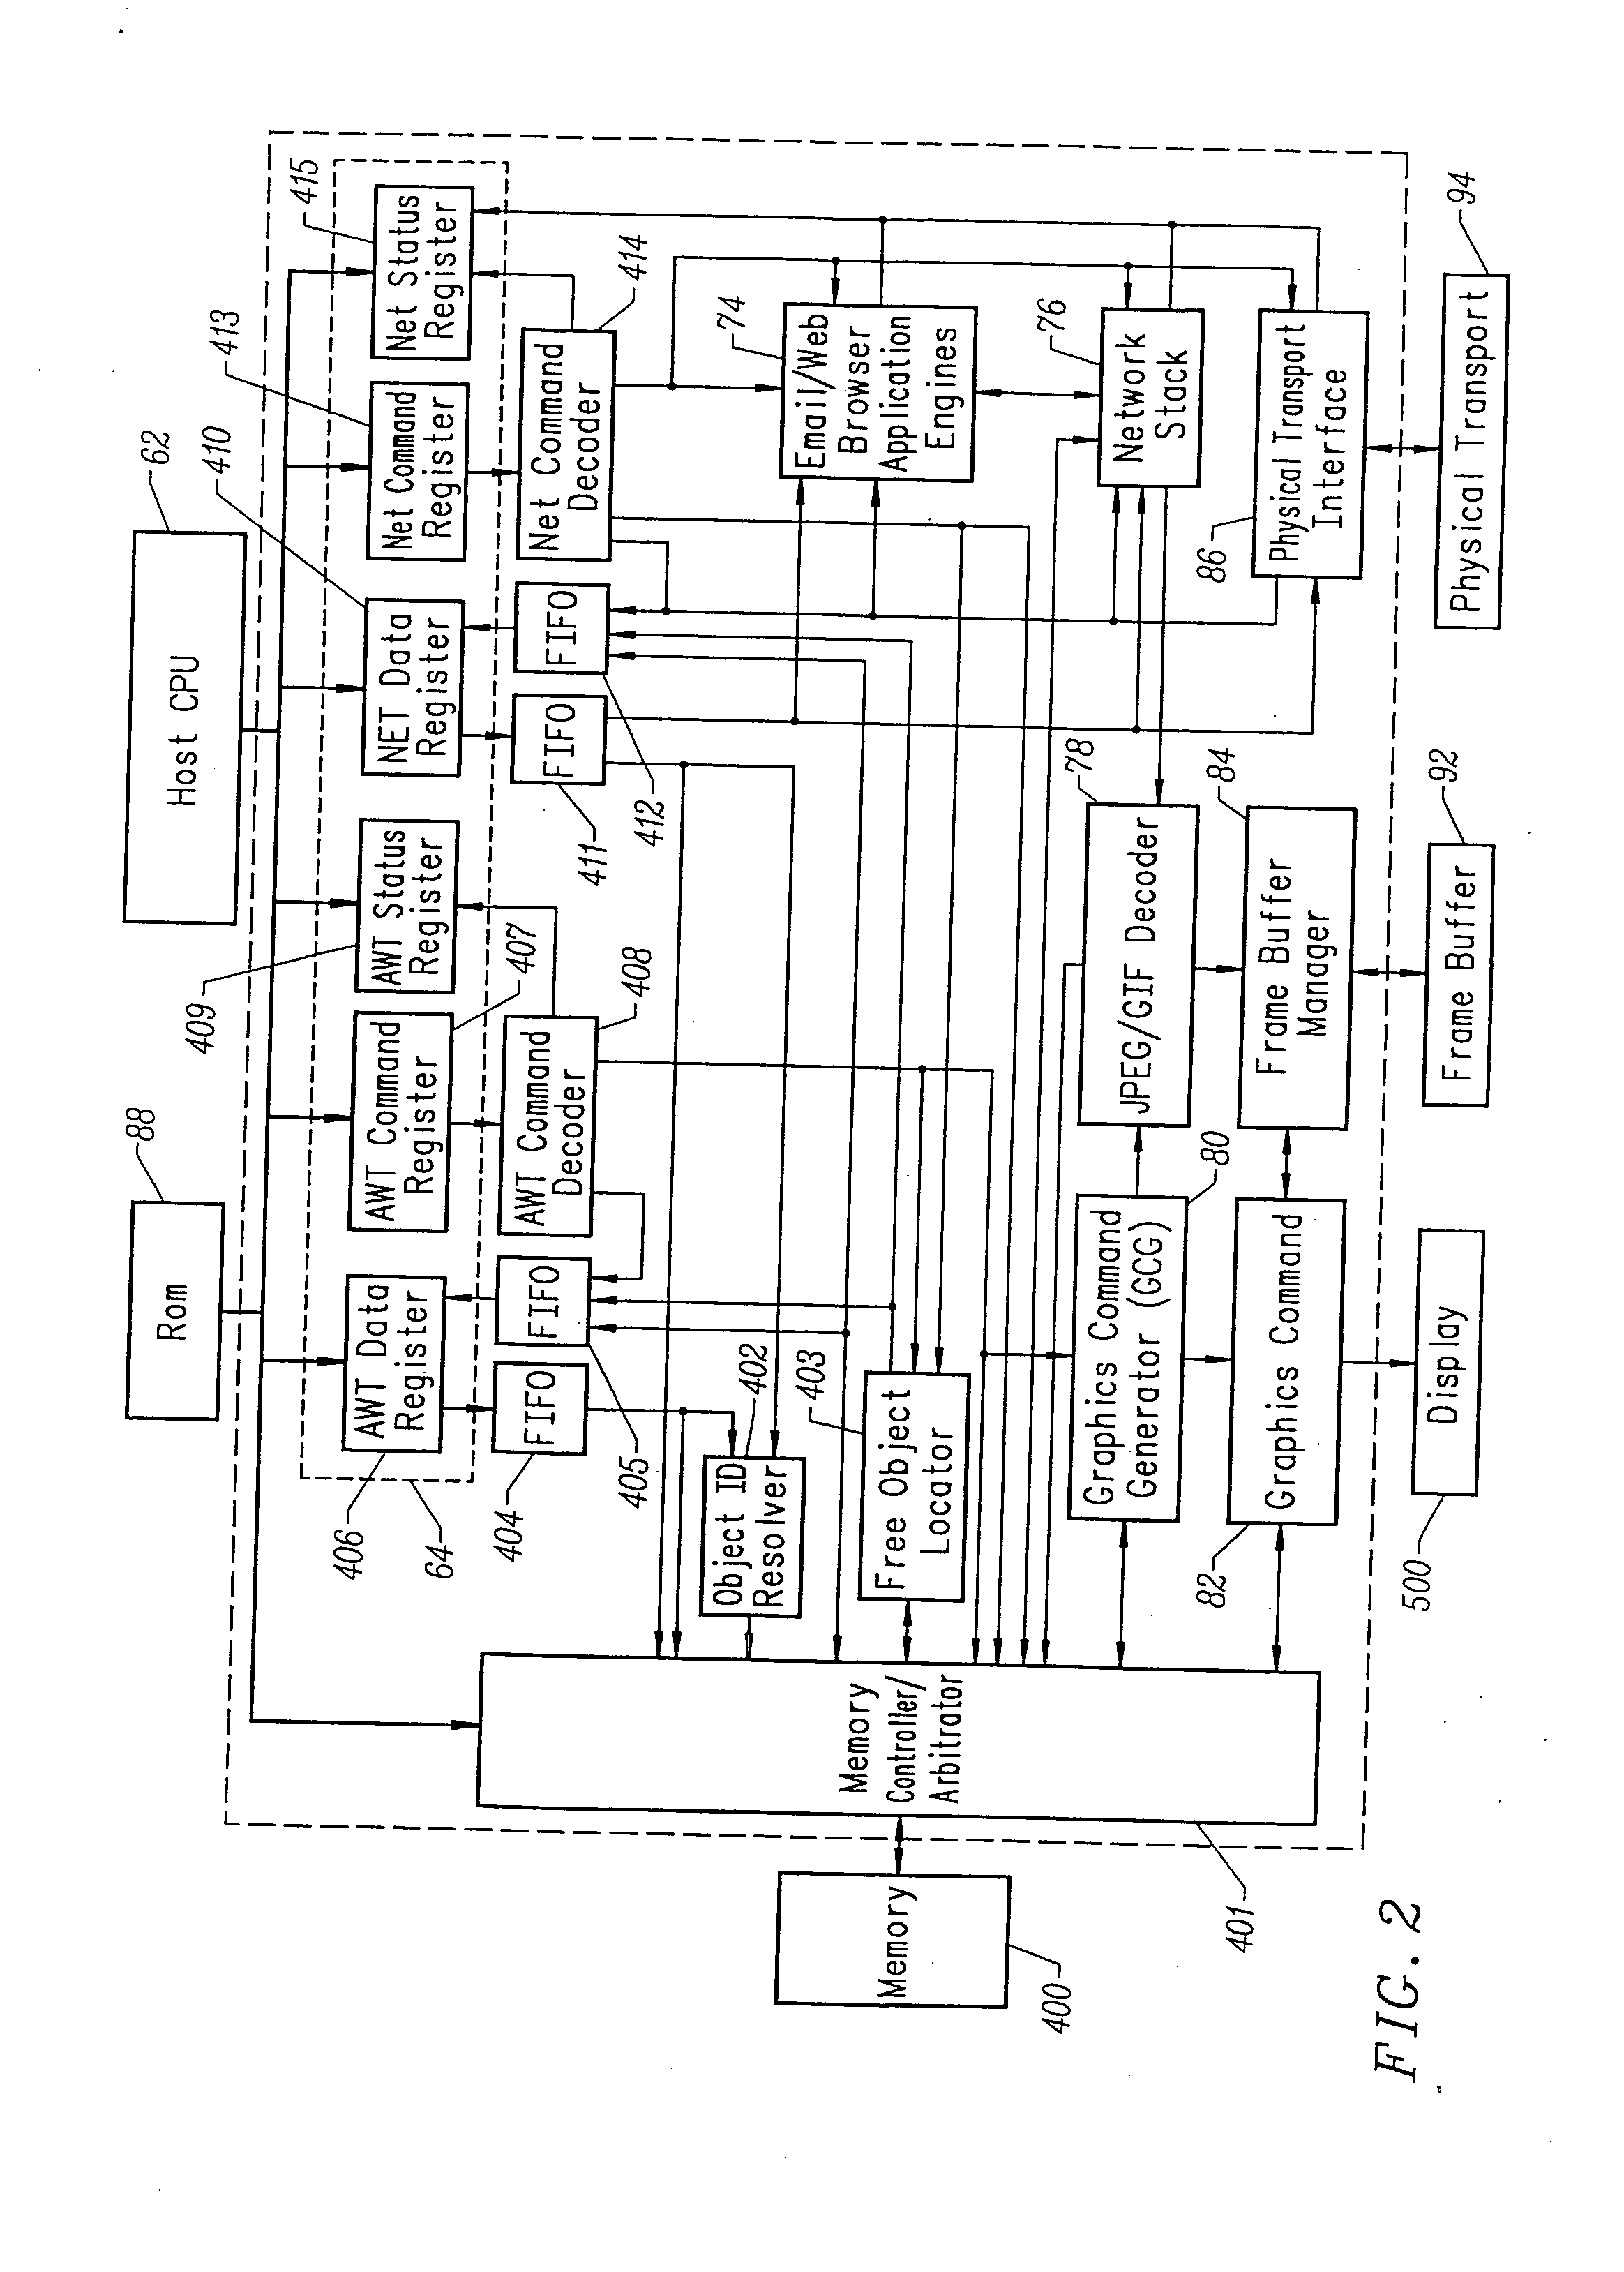 Offload system, method, and computer program product for port-related processing